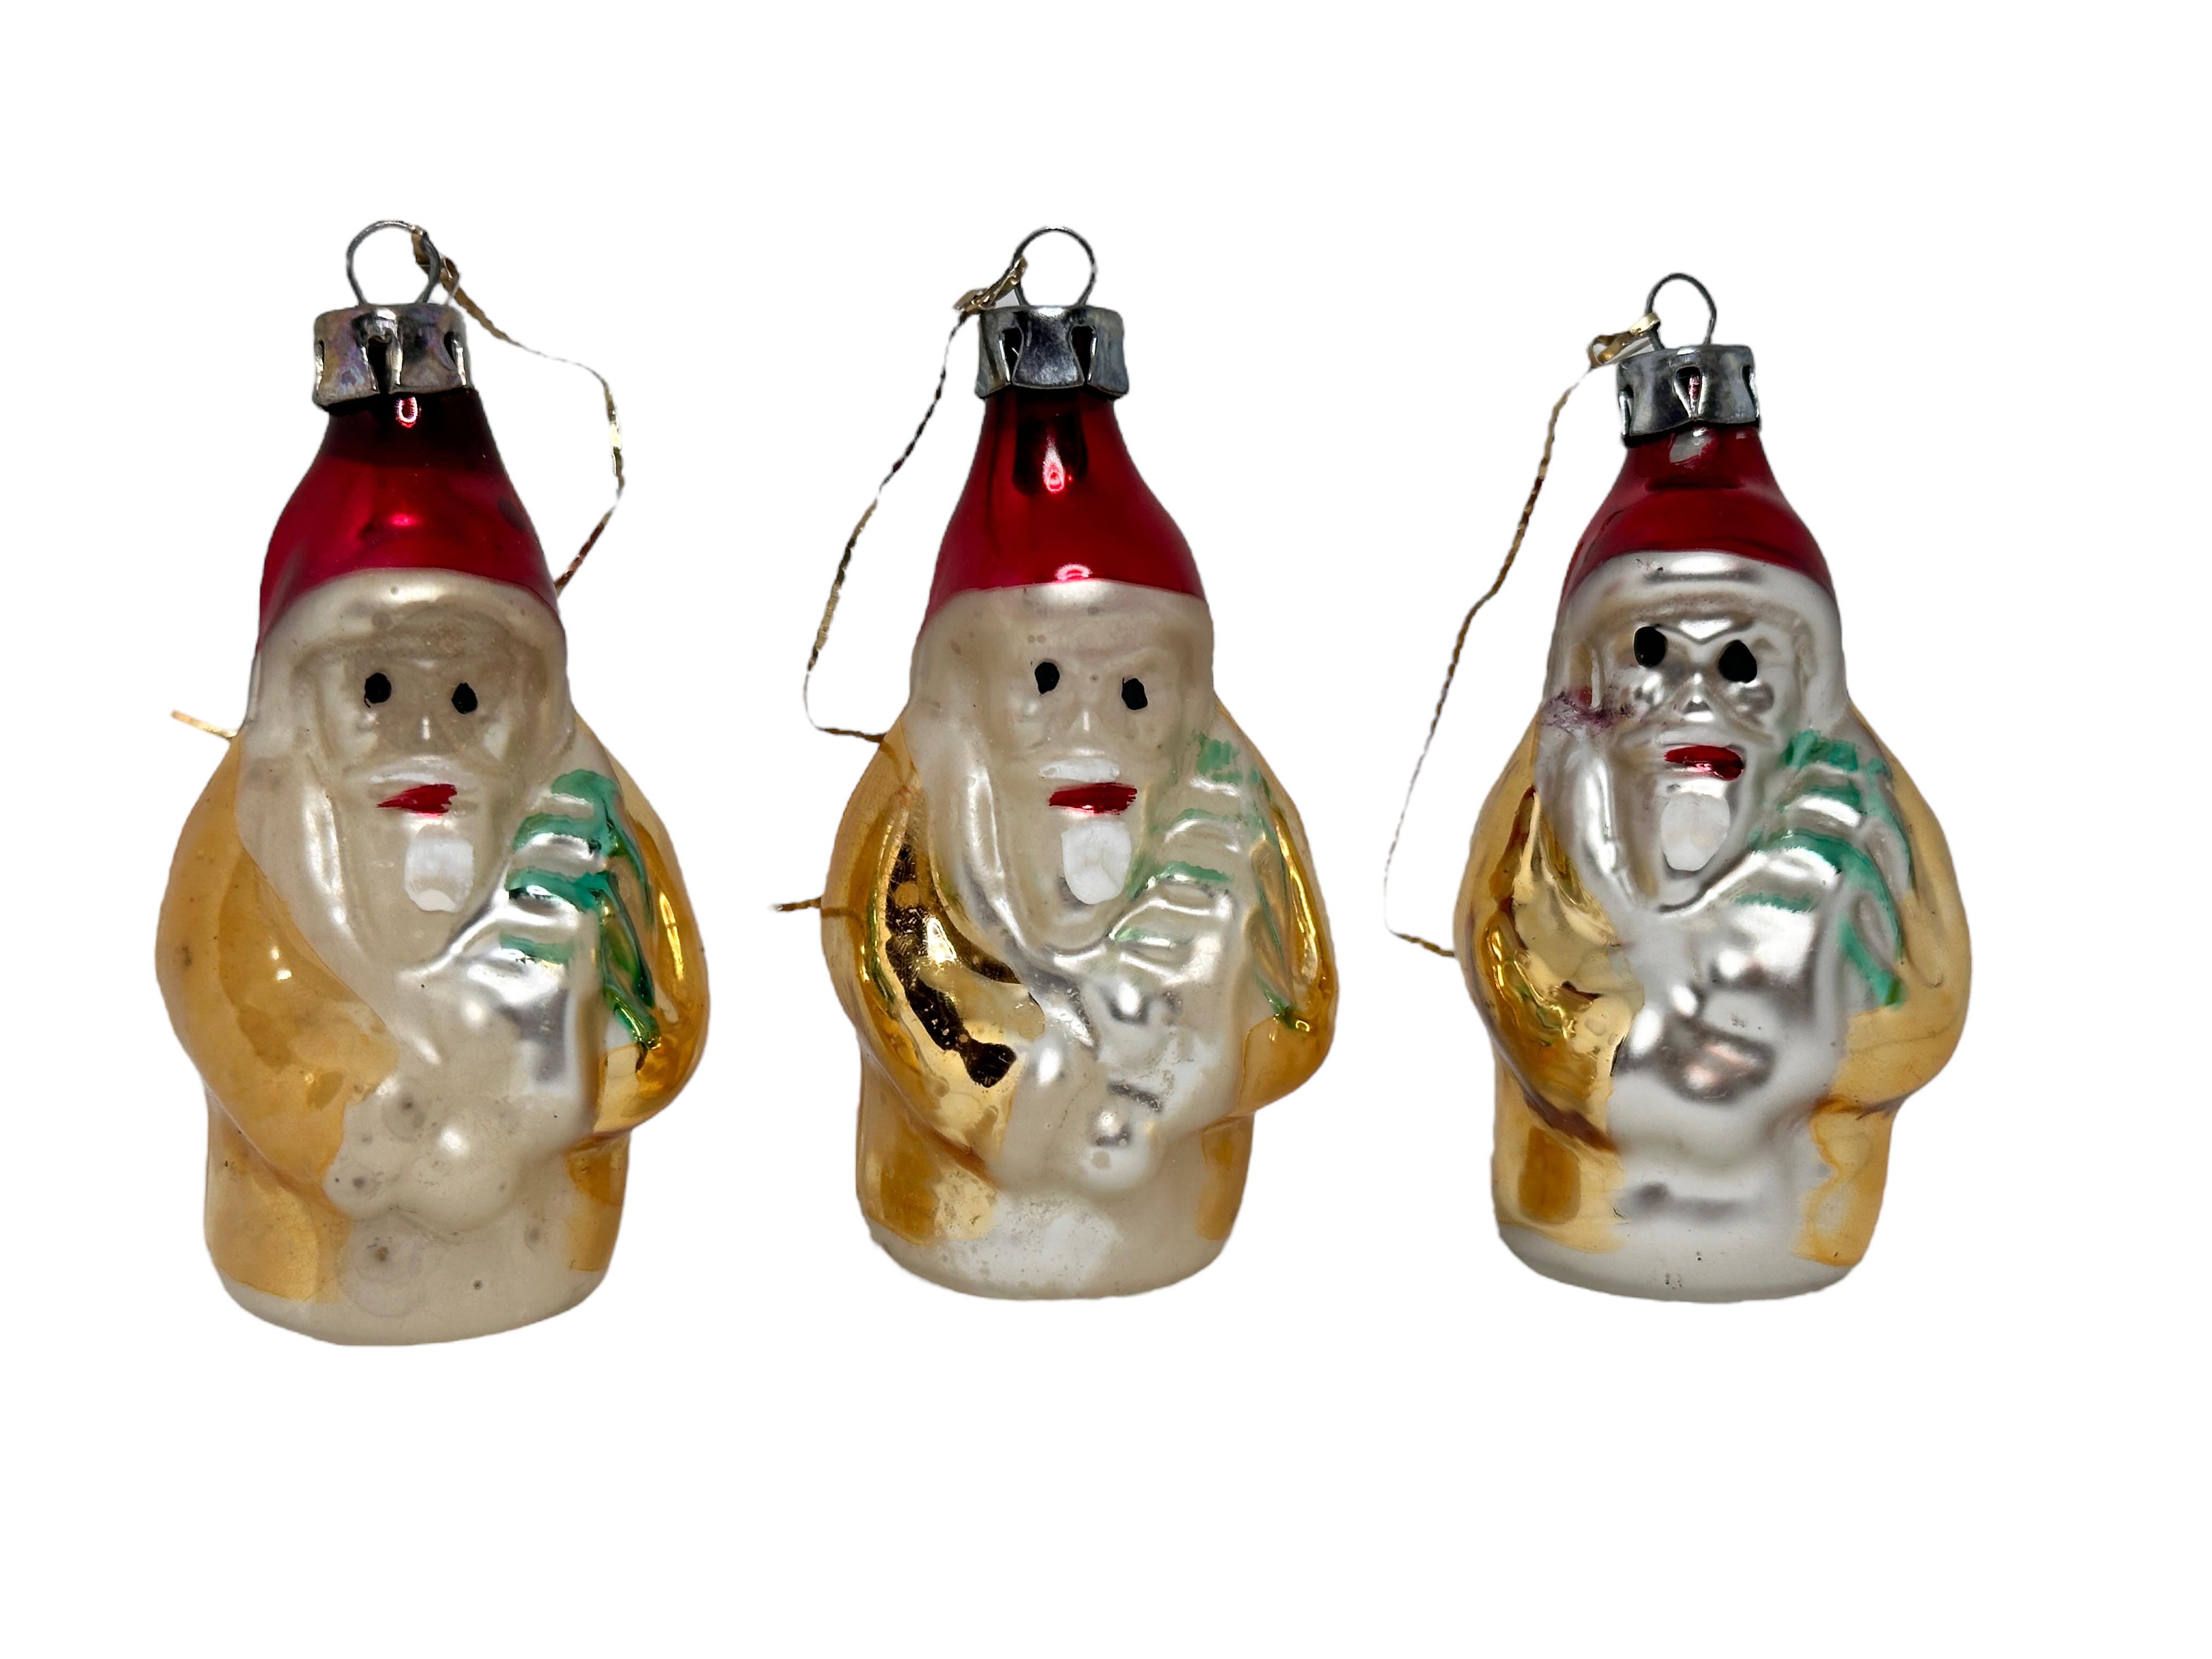 A rare Christmas ornament set of three. Each is made from mouth blown glass, this would be a great addition for your Christmas or feather tree. Size always given for the tallest item in the pictures. Age approx. 1930s to 1940s. Found at an estate